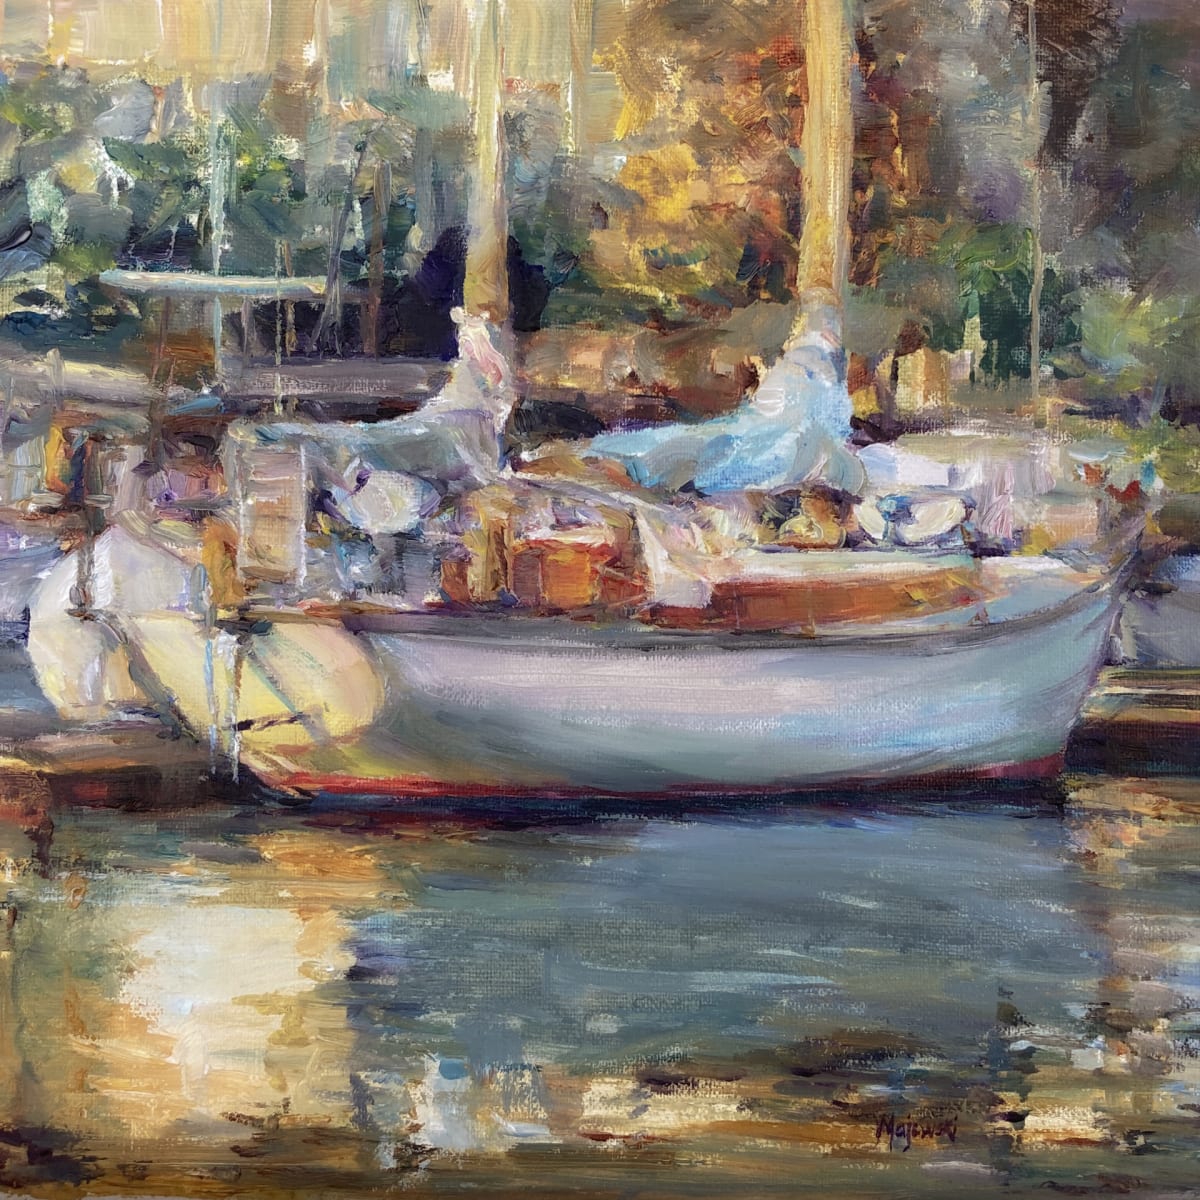 Golden Hour Waikiki Yacht Club by Carolyn Majewski  Image: Accepted: American Impressionist Society 4th Annual Associate Member Online Exhibition May 2024

Accepted: Laguna Plein Air Painters Association 2nd Annual "LPAPA Squared" All Member Show